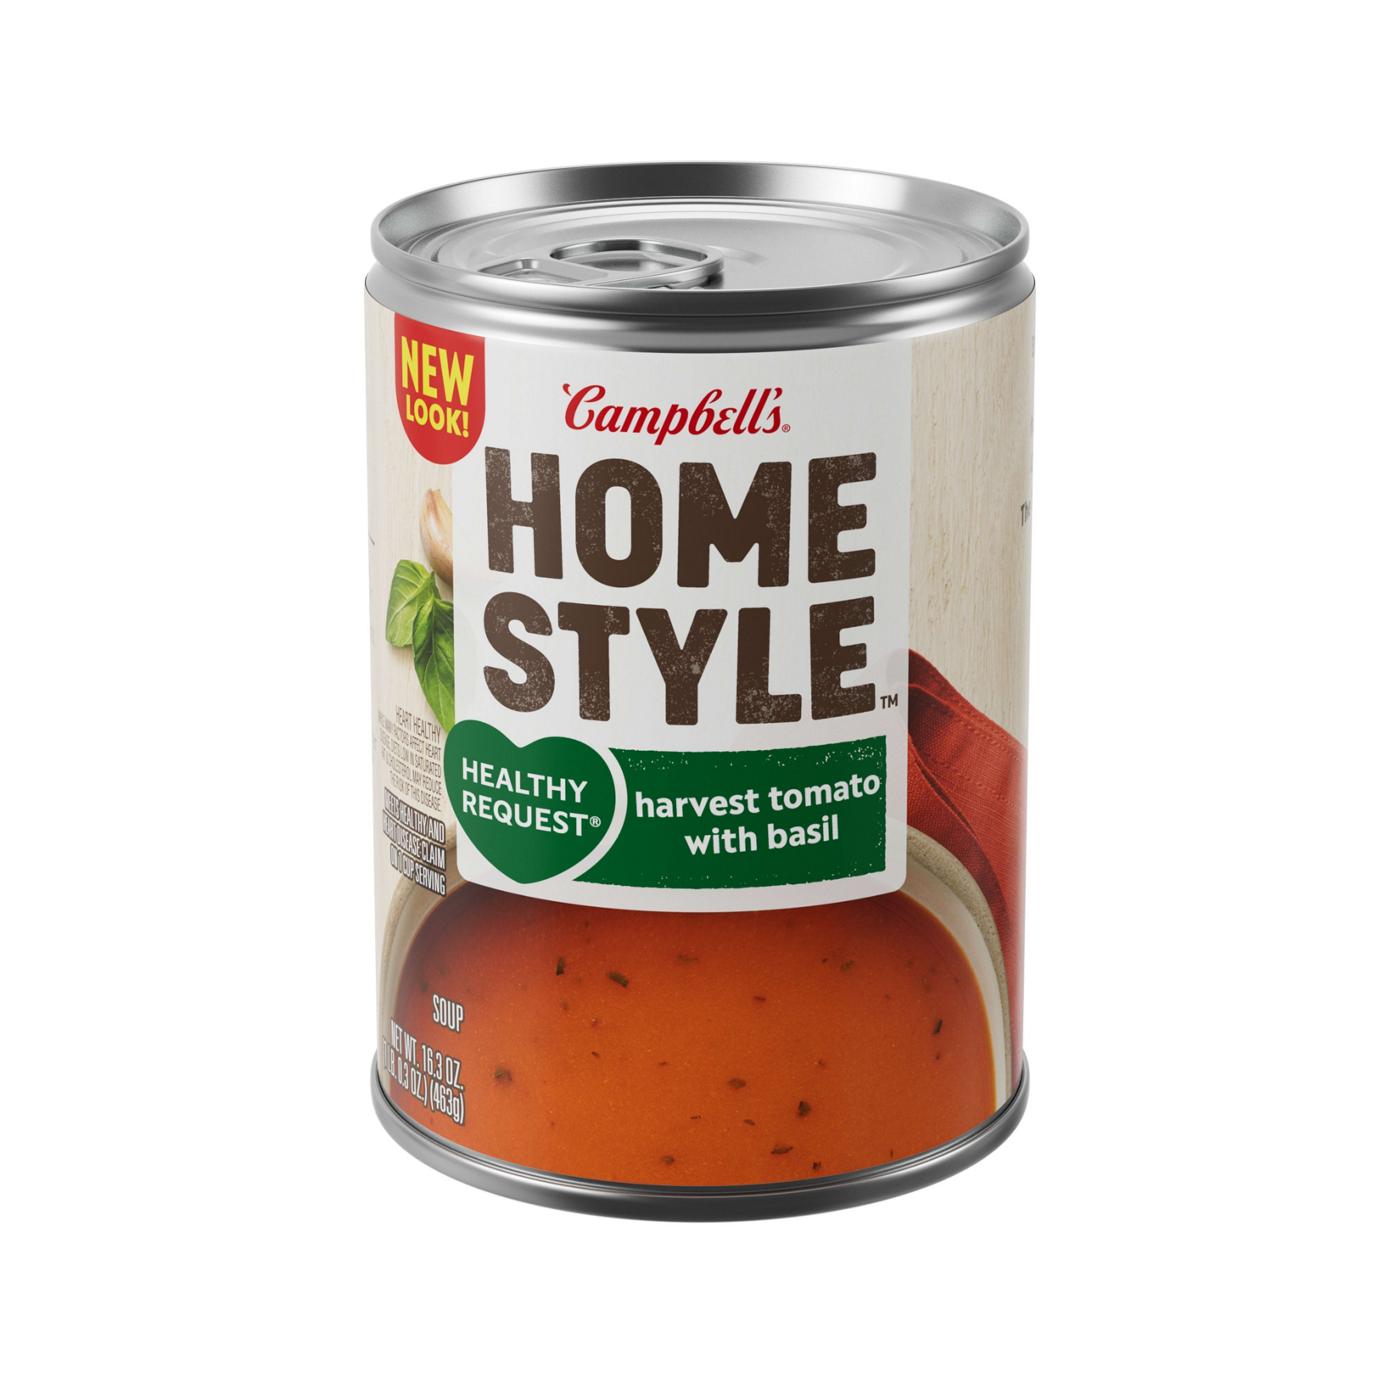 Campbell's Homestyle Healthy Request Harvest Tomato Basil; image 1 of 4